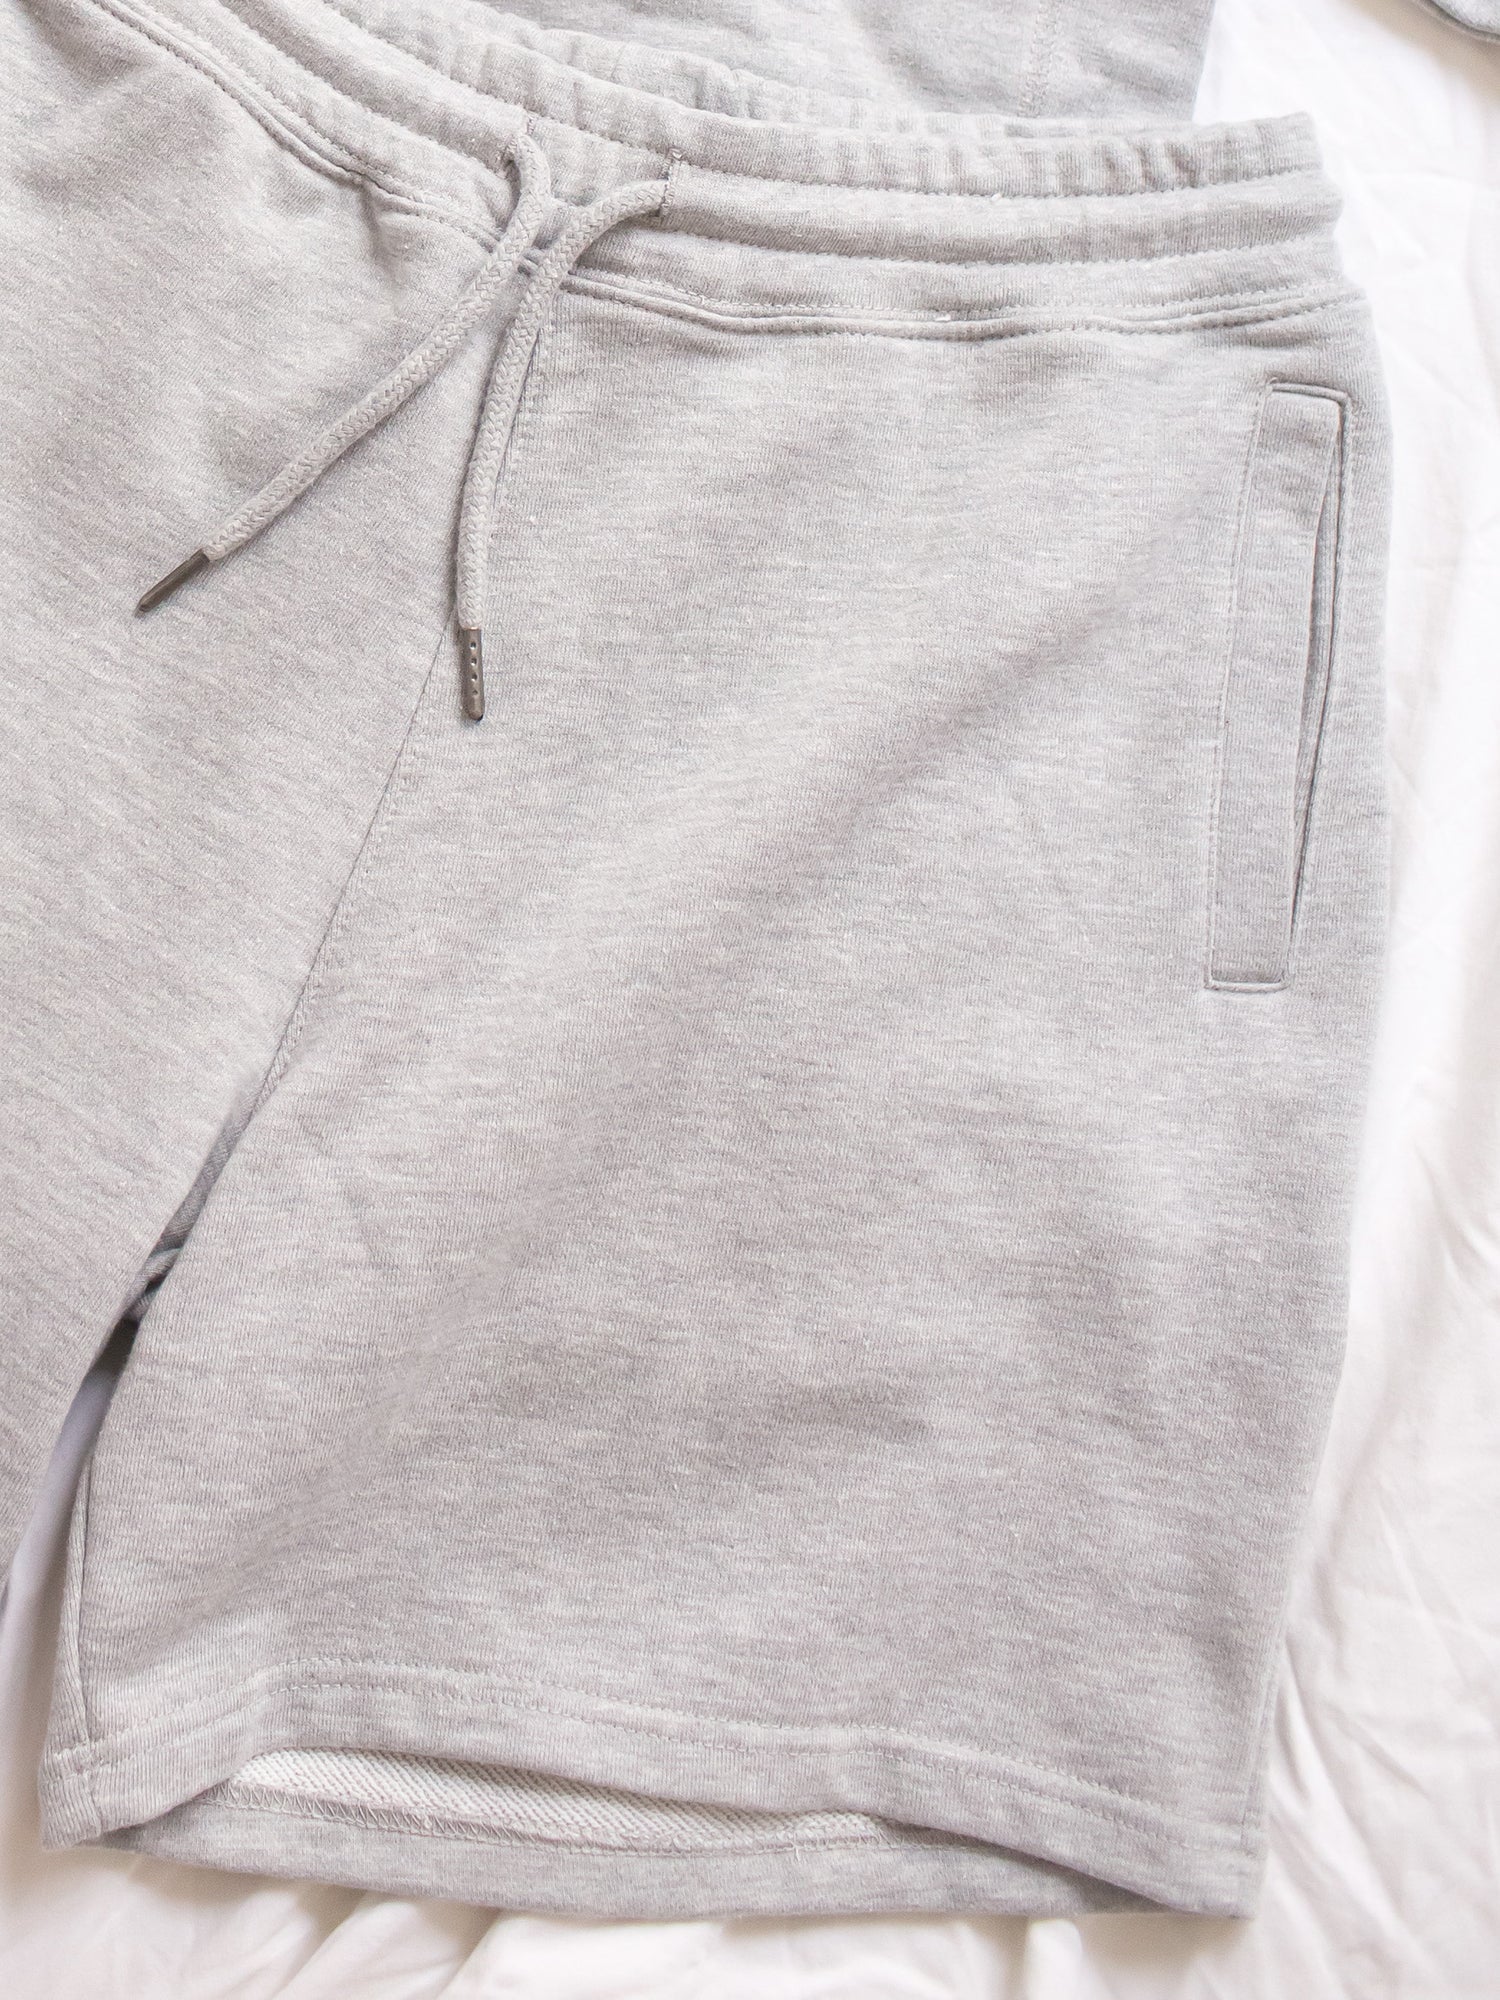 Zoomed in shot of heather grey cotton sweatshorts with drawstring waistband and pockets